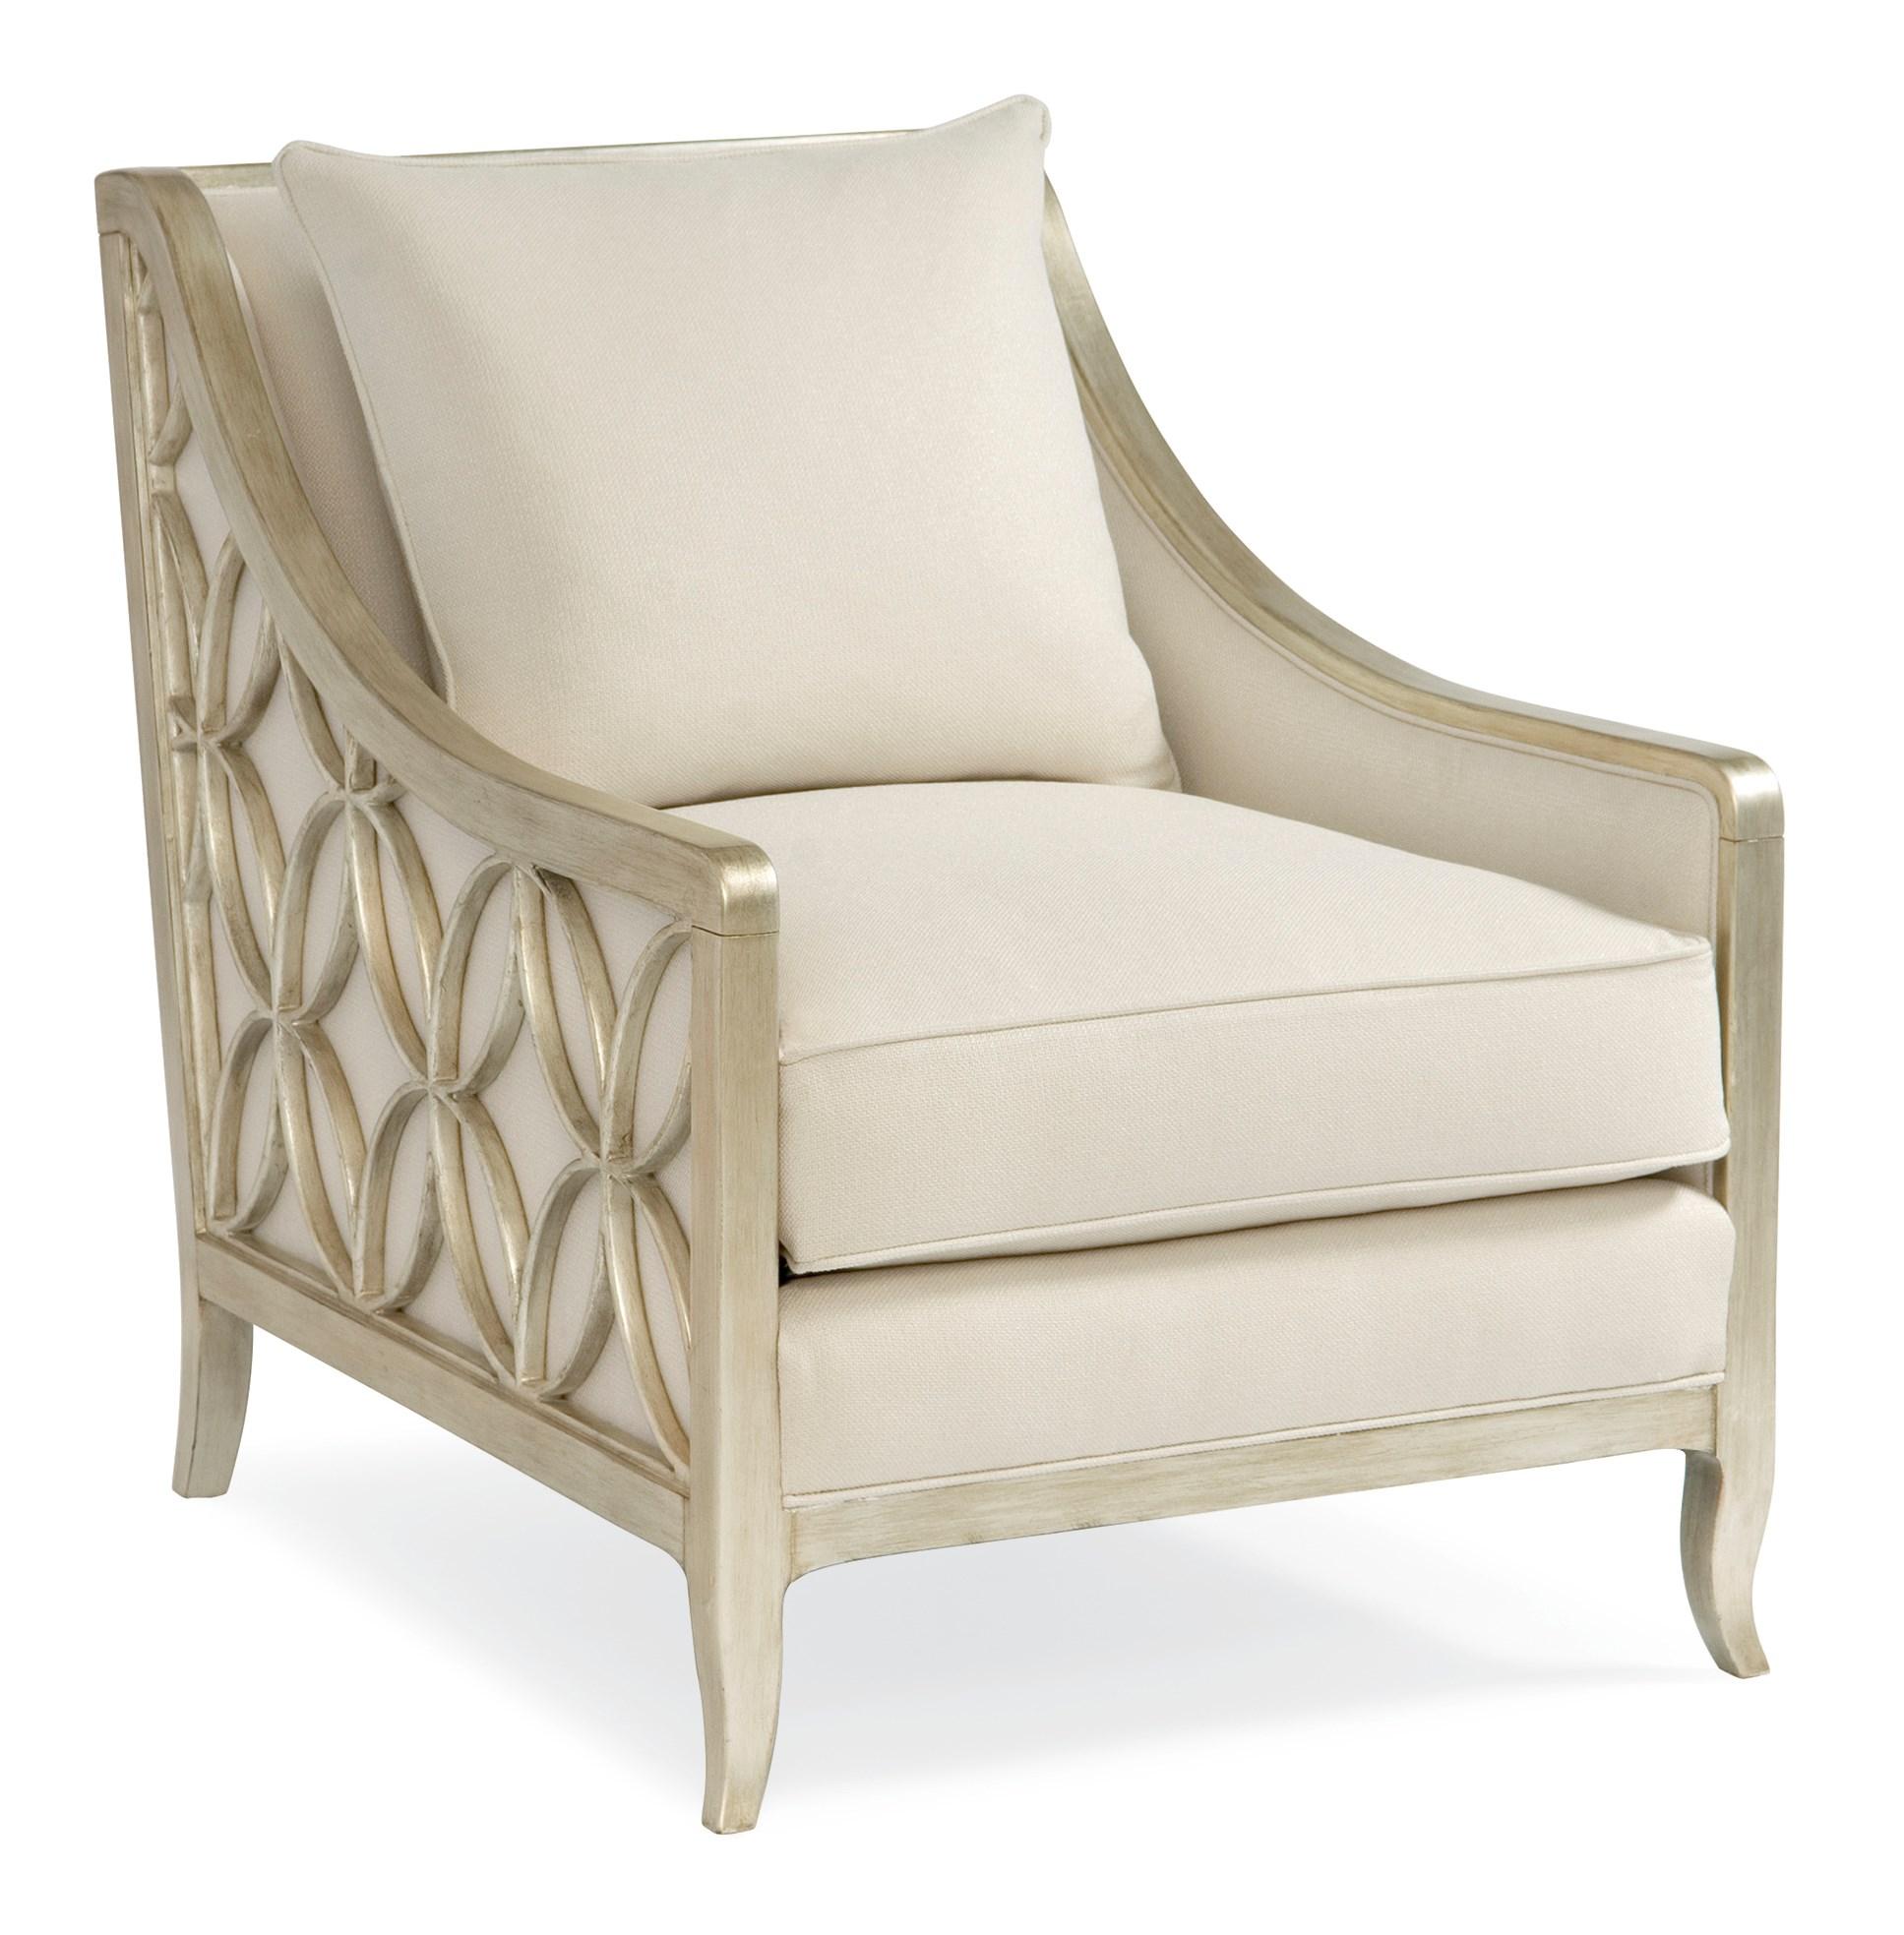 Contemporary Accent Chair SOCIAL BUTTERFLY UPH-CHALOU-02D in Beige Fabric